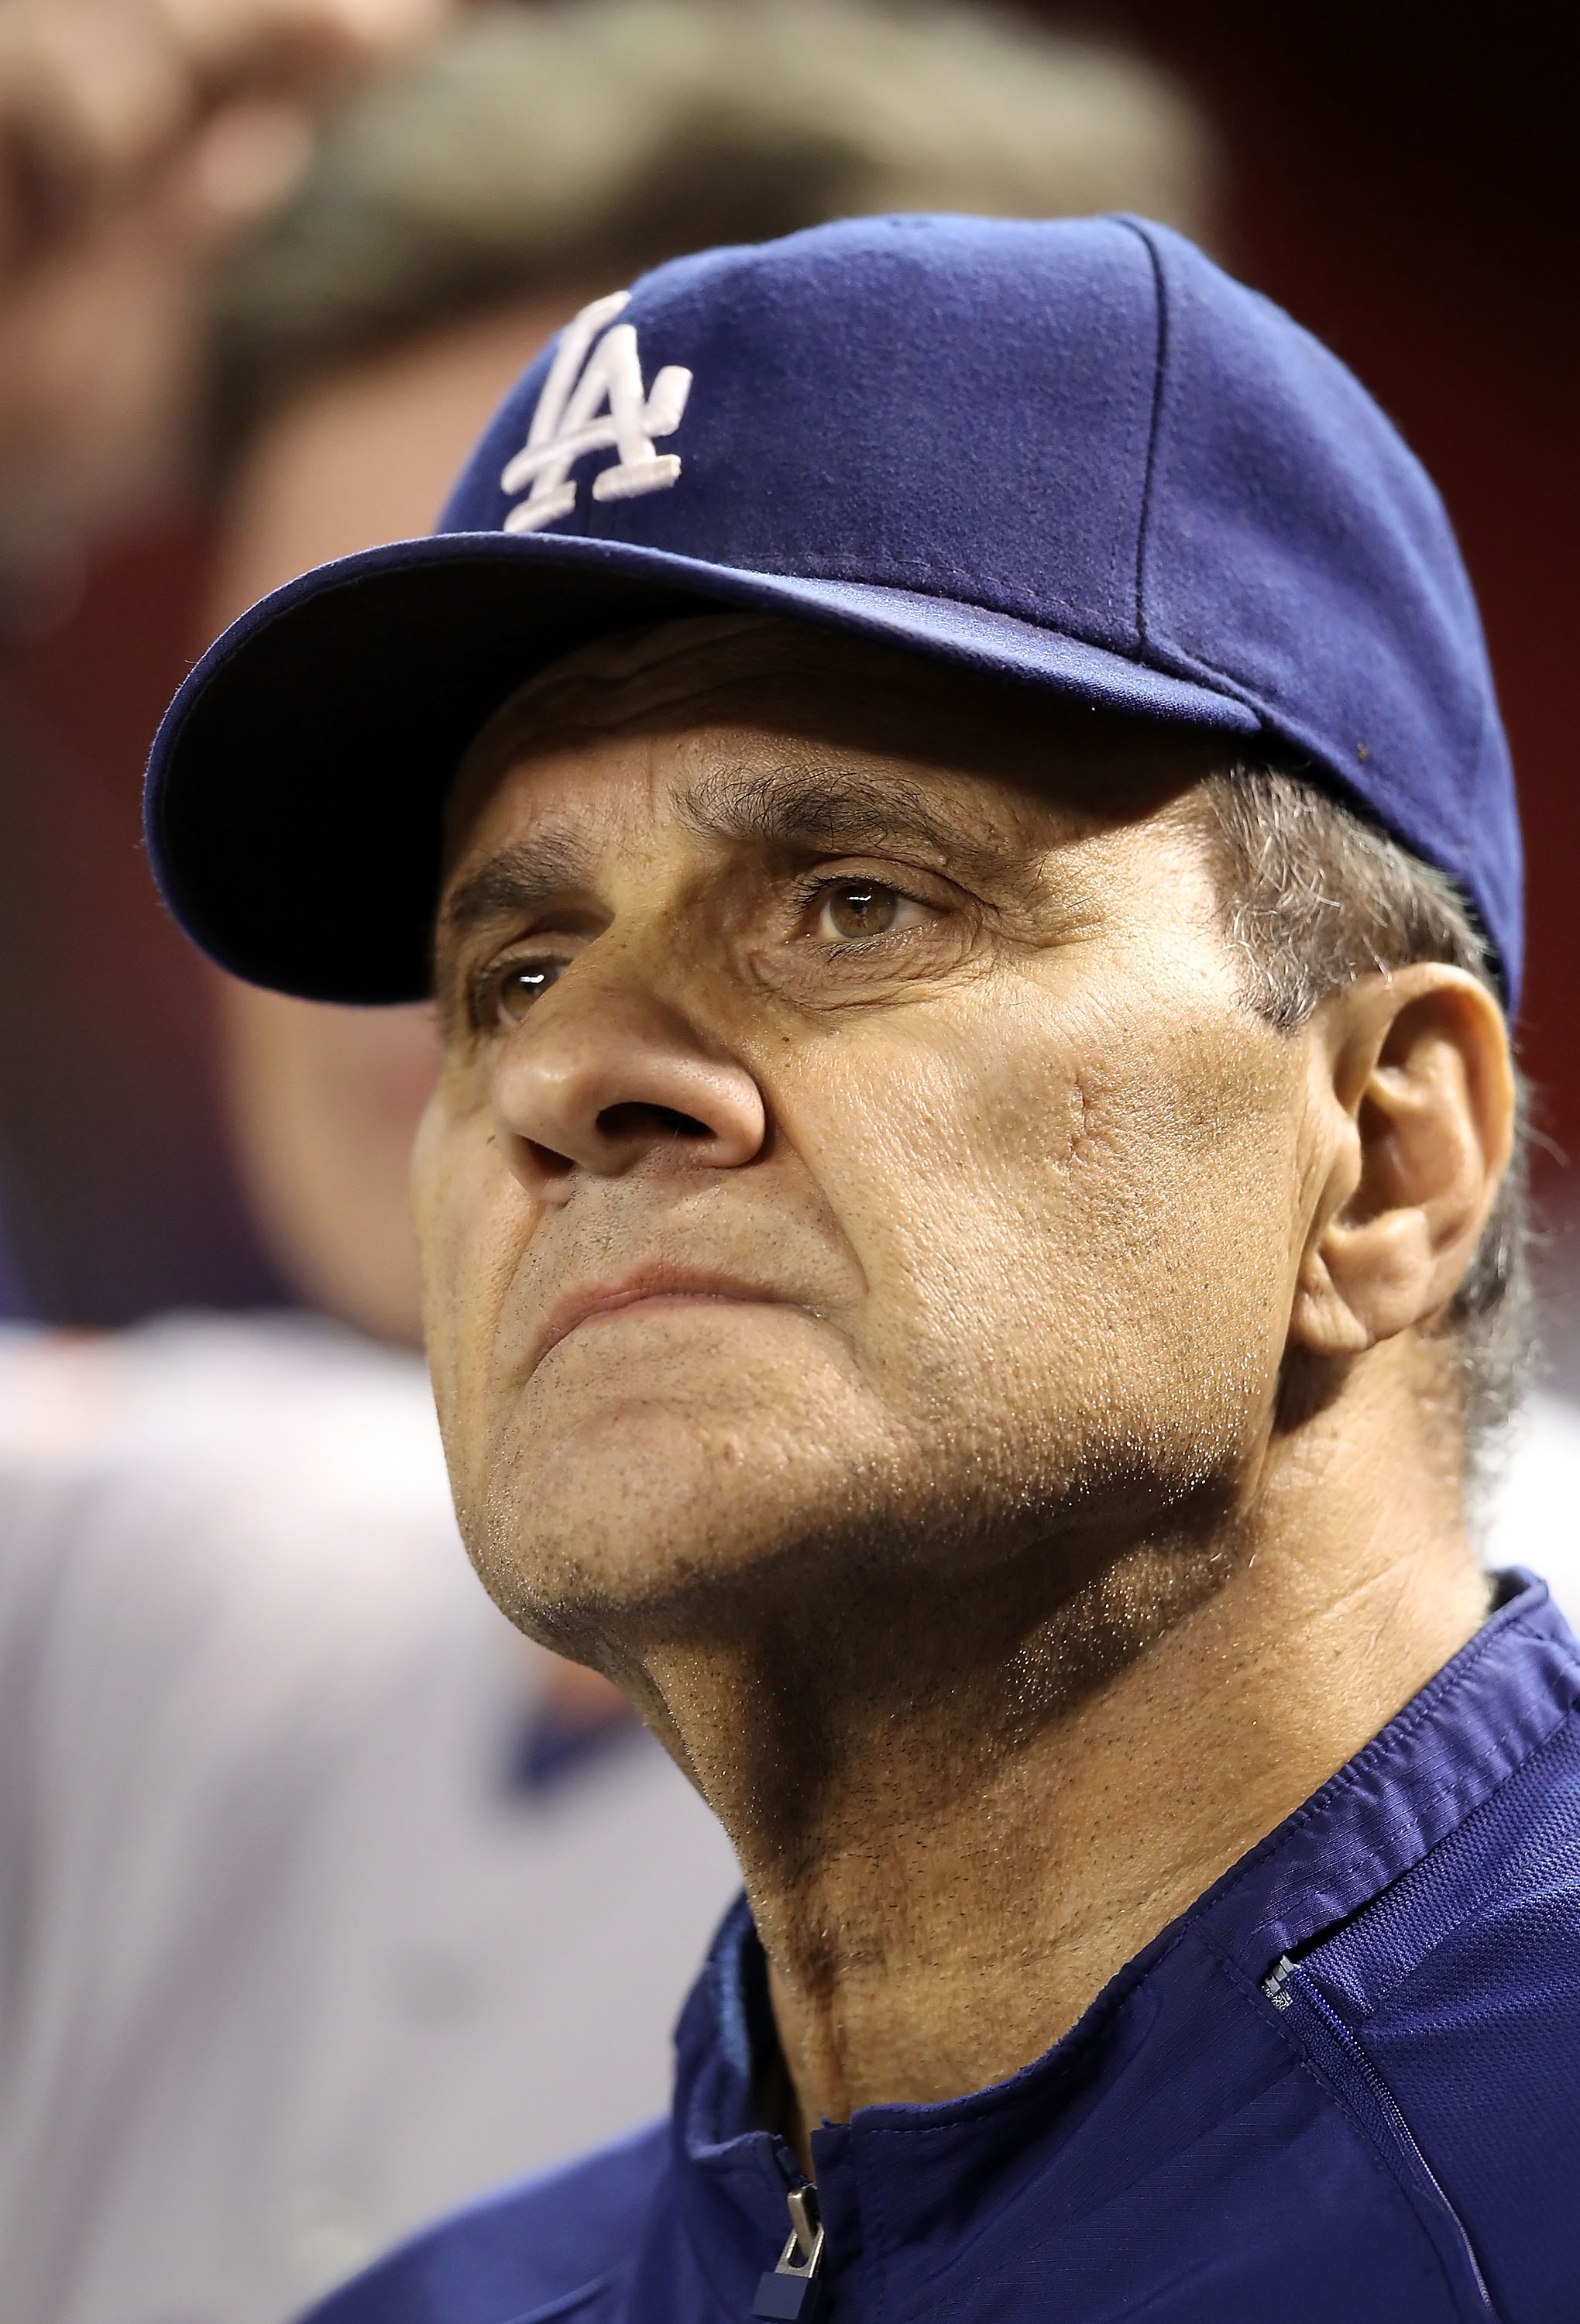 PHOENIX - SEPTEMBER 24:  Manager Joe Torre of the Los Angeles Dodgers watches from the dugout during the Major League Baseball game against the Arizona Diamondbacks at Chase Field on September 24, 2010 in Phoenix, Arizona.  (Photo by Christian Petersen/Ge